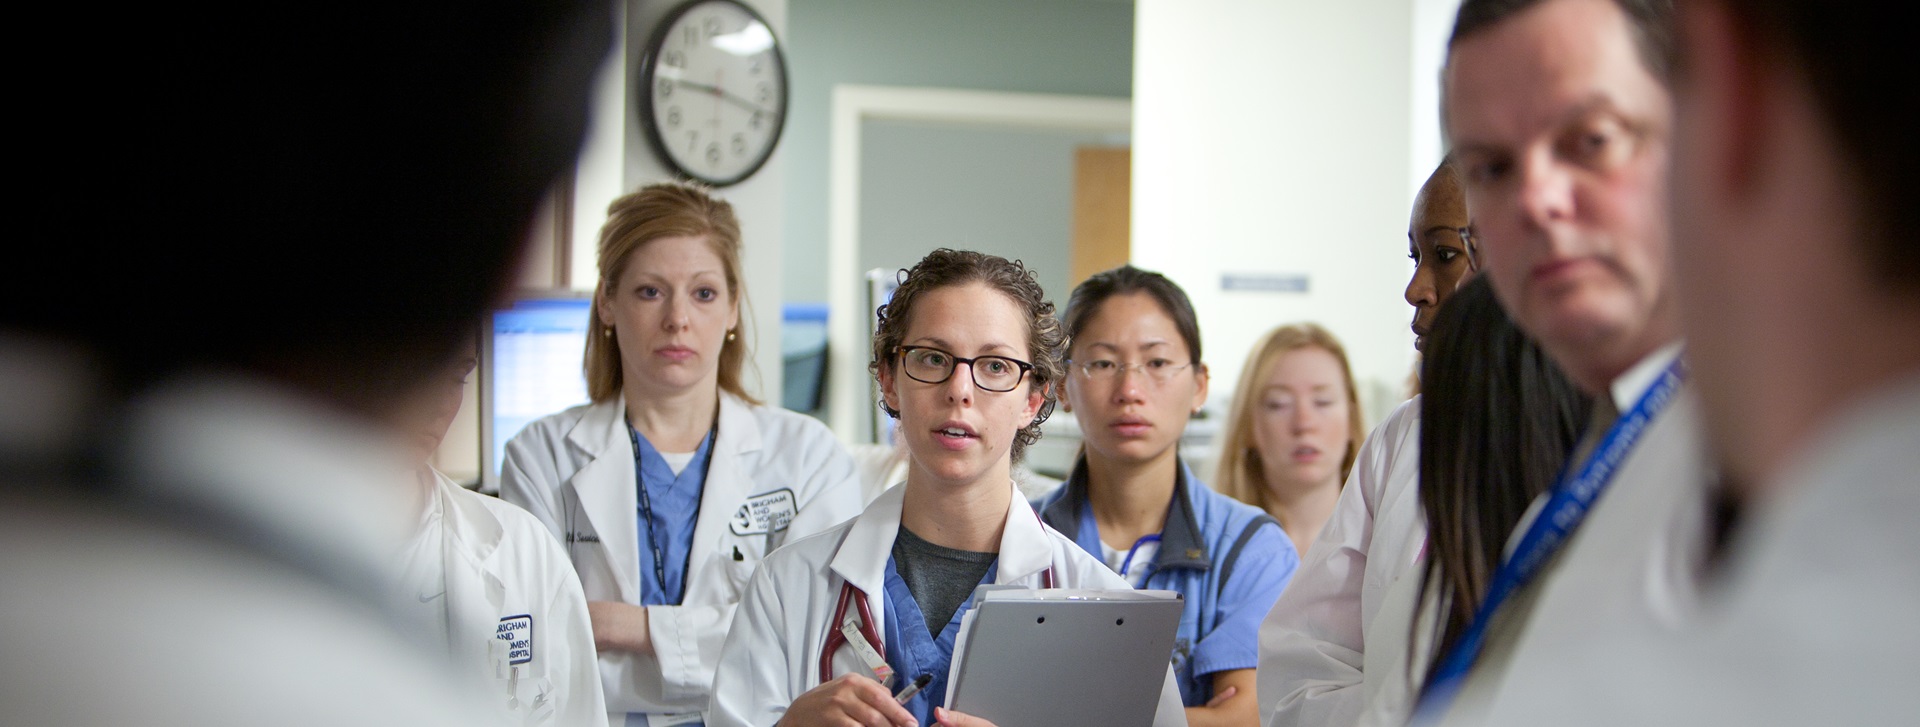 Group of doctors looking on at a lecture in clinical